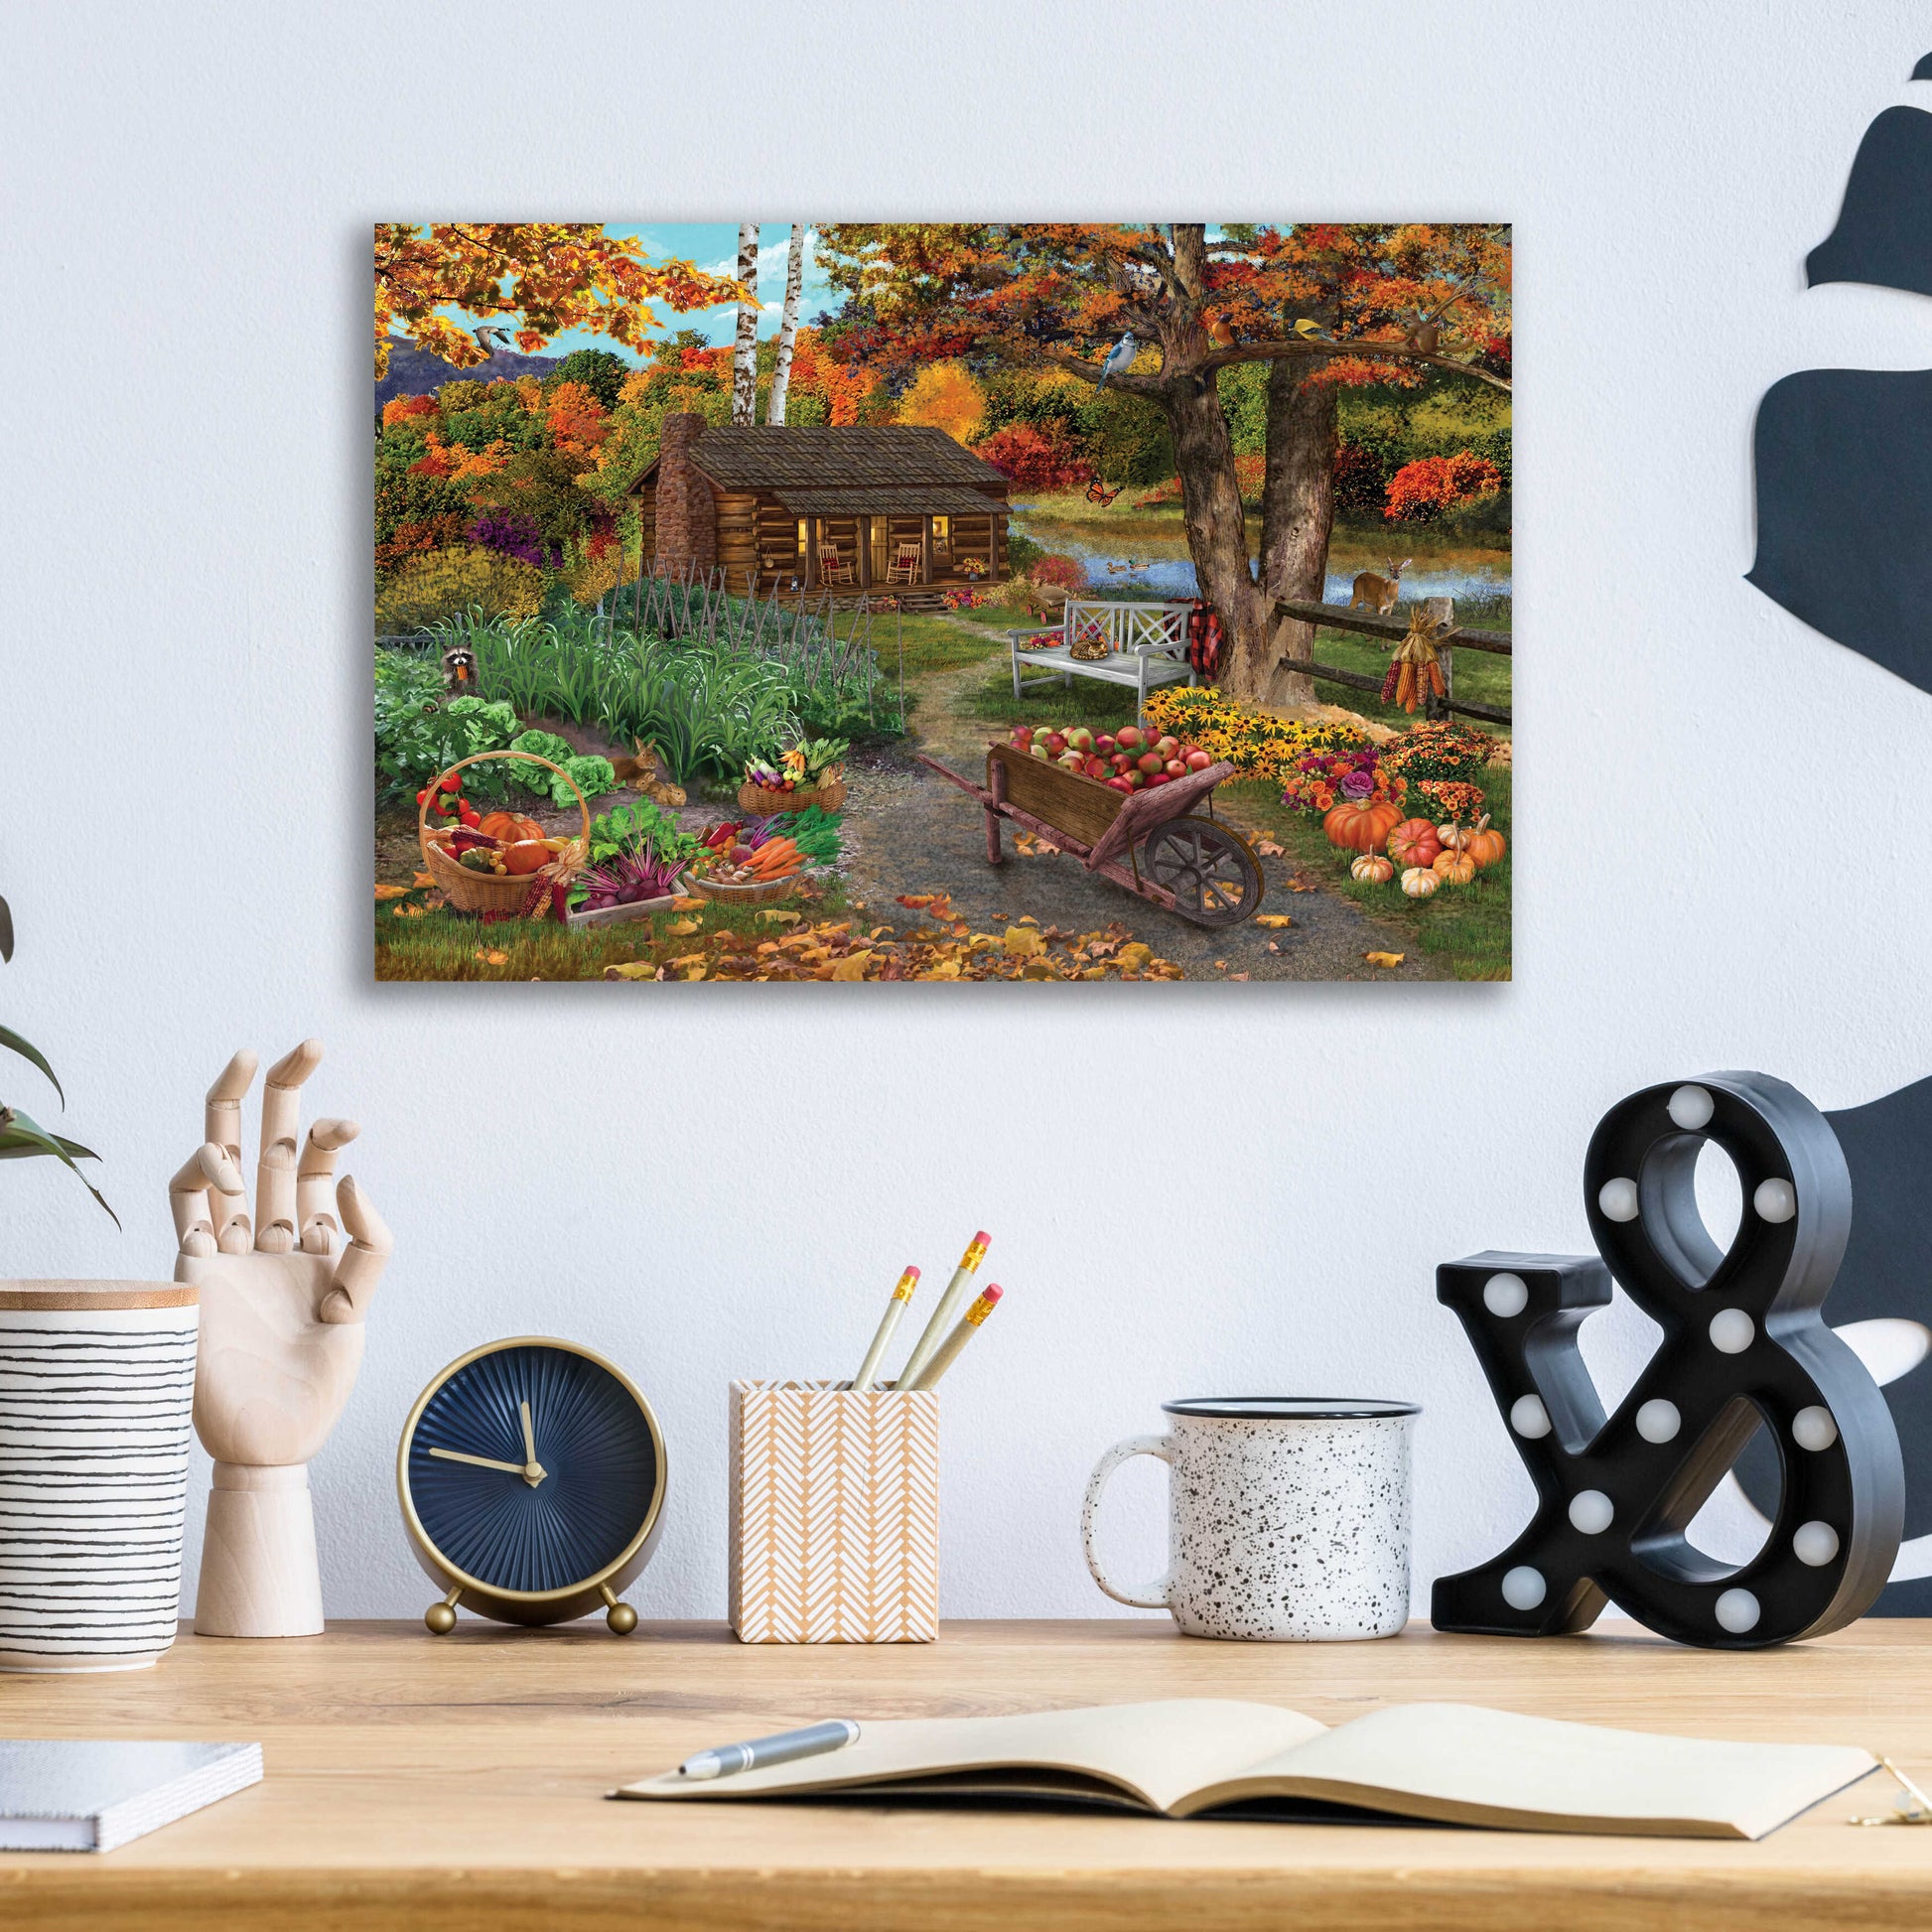 Epic Art 'Harvest at the Cabin' by Bigelow Illustrations, Acrylic Glass Wall Art,16x12